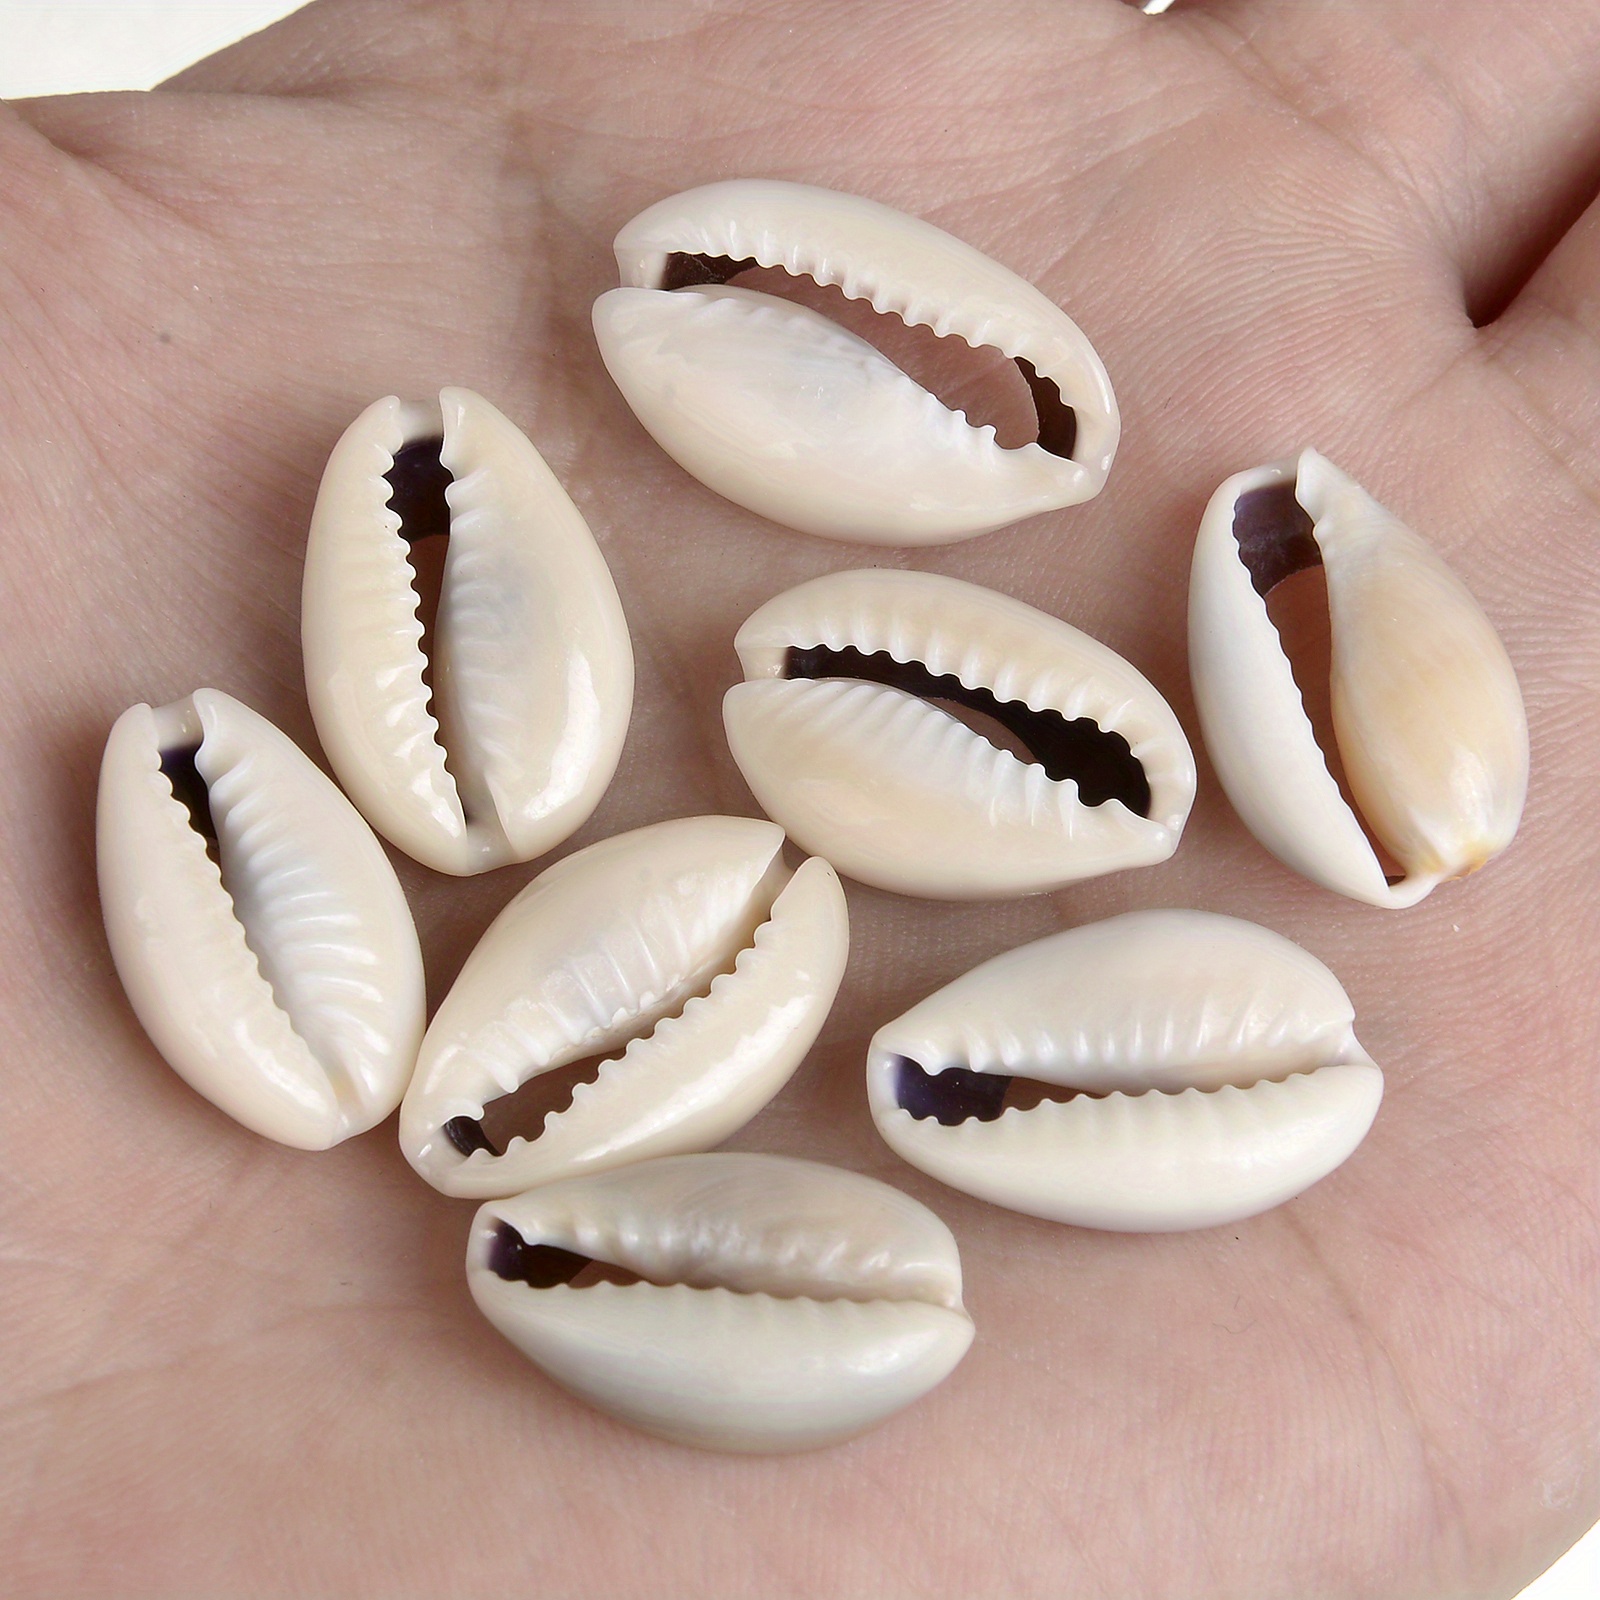 Zotoone 20pcs Natural Shell Pendants Spiral Shell Conch Shell Beach Cowrie  Sea Shells Charms Jewelry Charms Ocean Beach Dangle Beads for Nautical